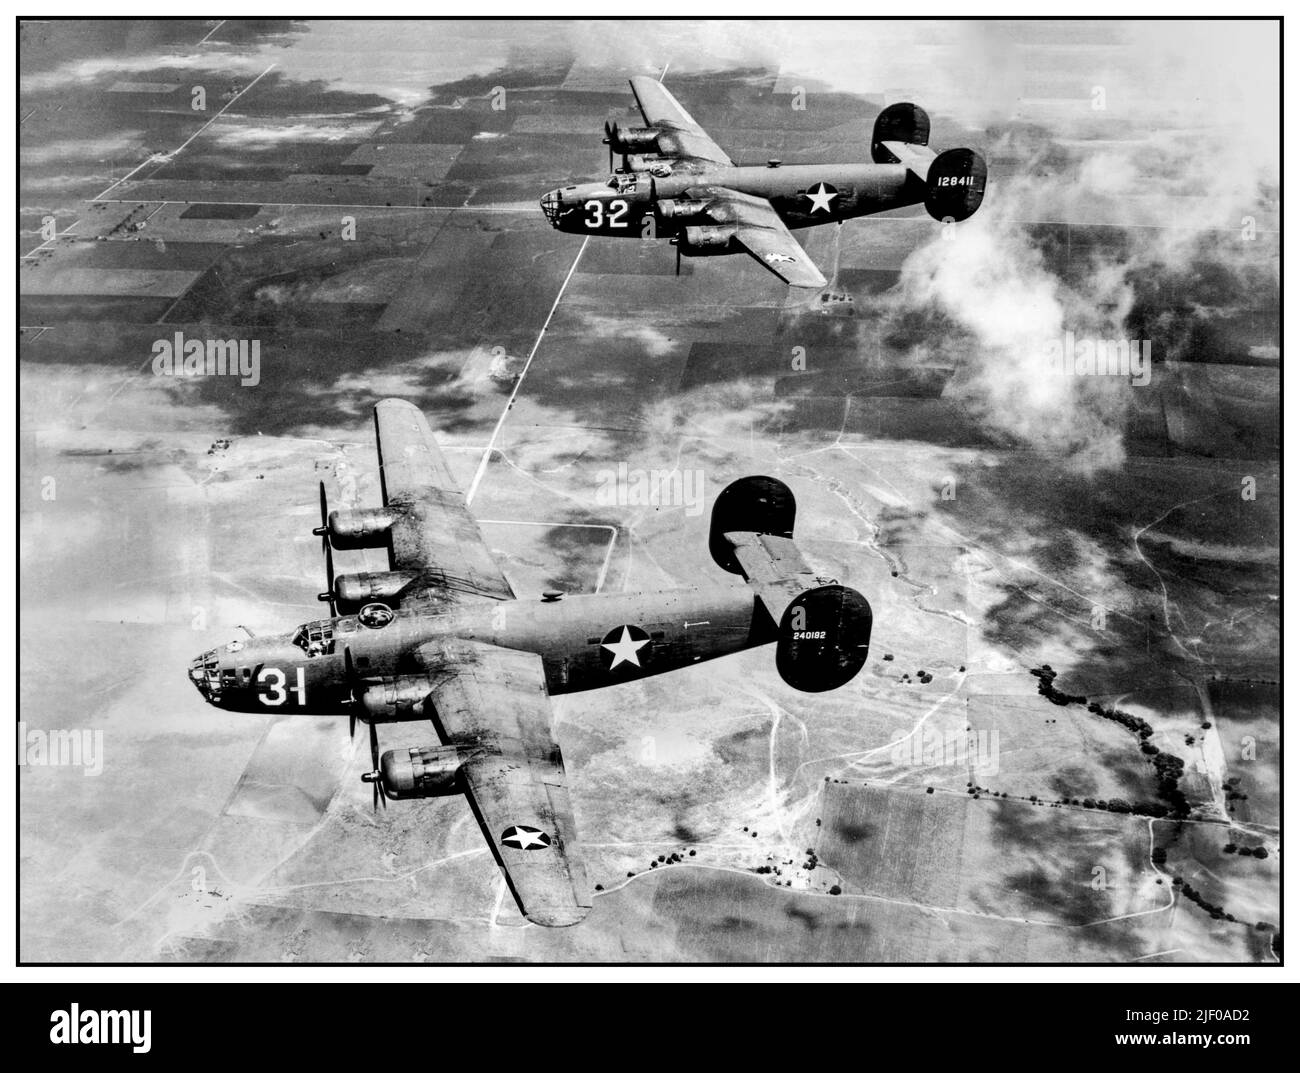 WW2 USAF Consolidated B-24 'Liberator' bomber aircraft  B-24 airplane suitable for long over-water bombing missions in World War II Second World War. The Consolidated B-24 Liberator is an American heavy bomber, designed by Consolidated Aircraft of San Diego, California. B-24 was the mainstay of the US strategic bombing campaign in the Western European theater. Due to its range, it proved useful in bombing operations in the Pacific, including the bombing of Japan. Long-range anti-submarine Liberators played an instrumental role in closing the Mid-Atlantic gap in the Battle of the Atlantic. Stock Photo